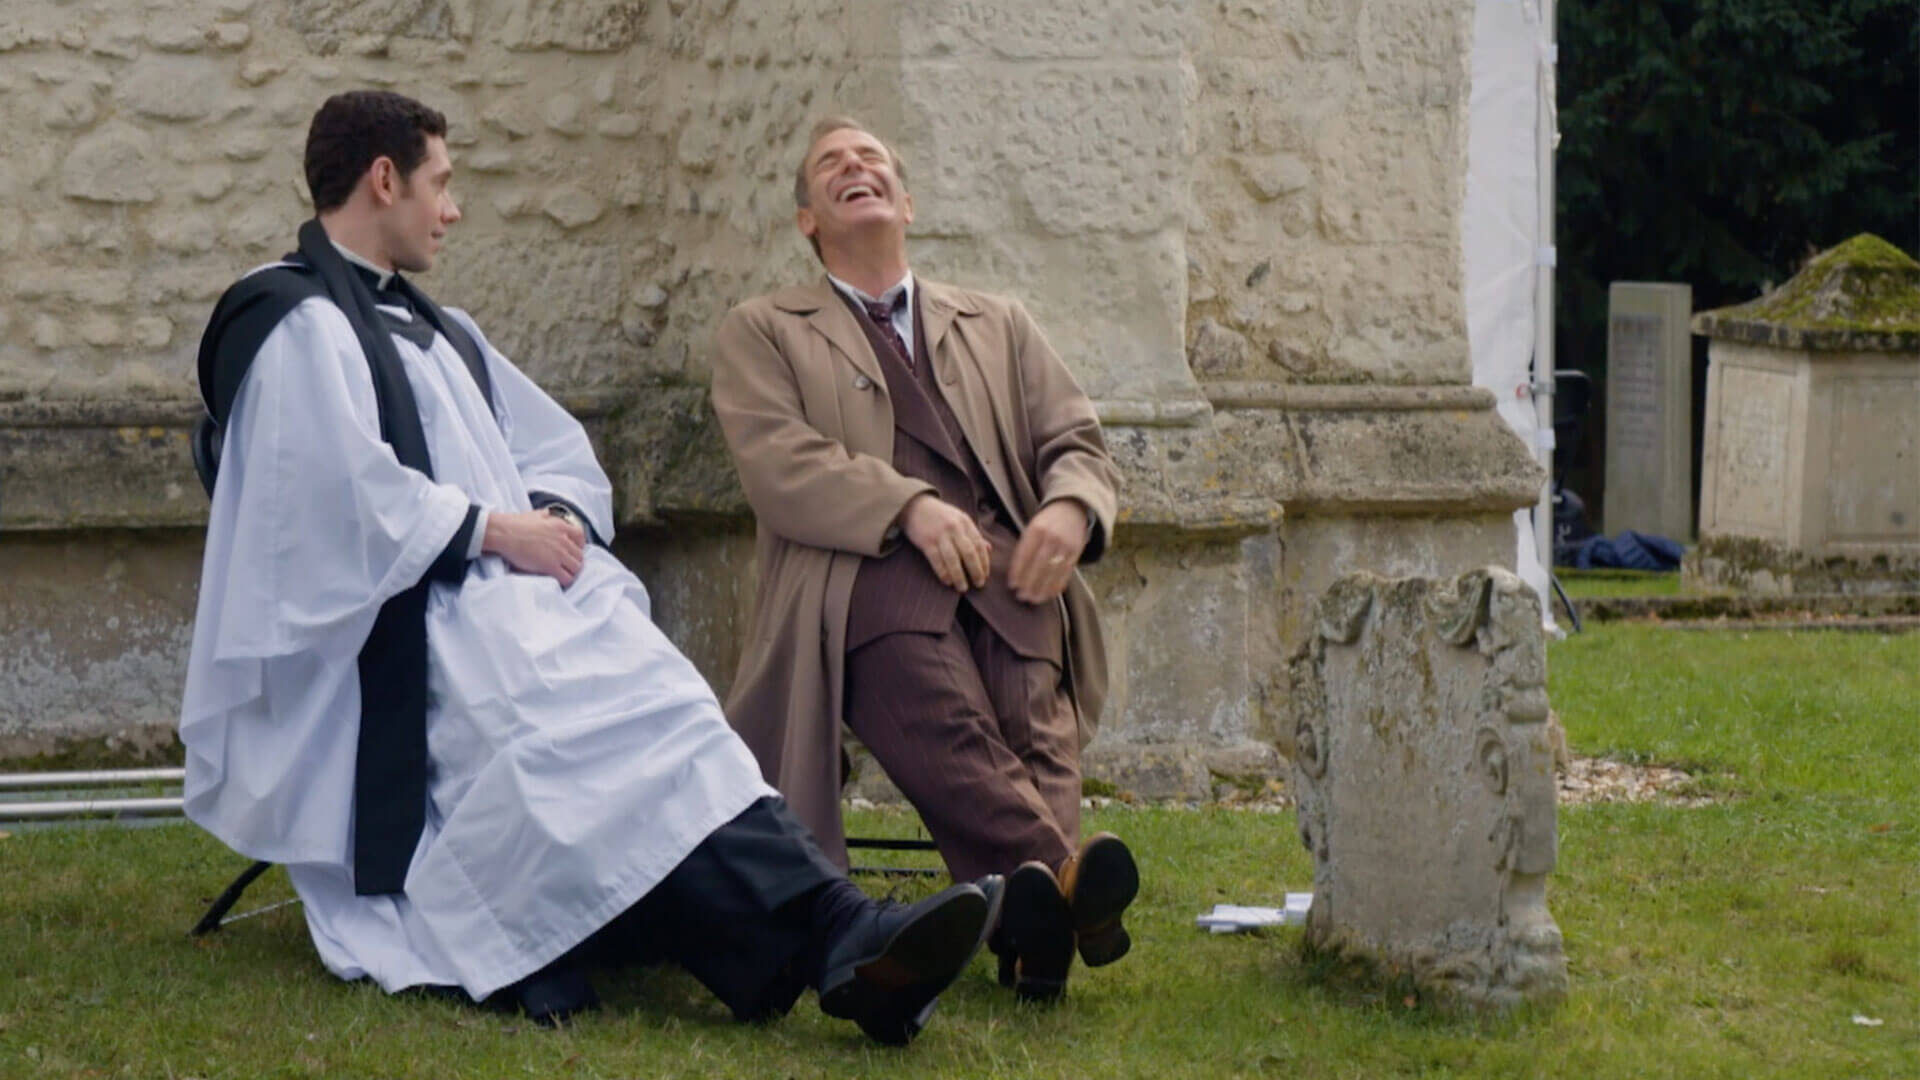 Actors Tom Brittney and Robson Green share a laugh on the set of MASTERPIECE's mystery series Grantchester.